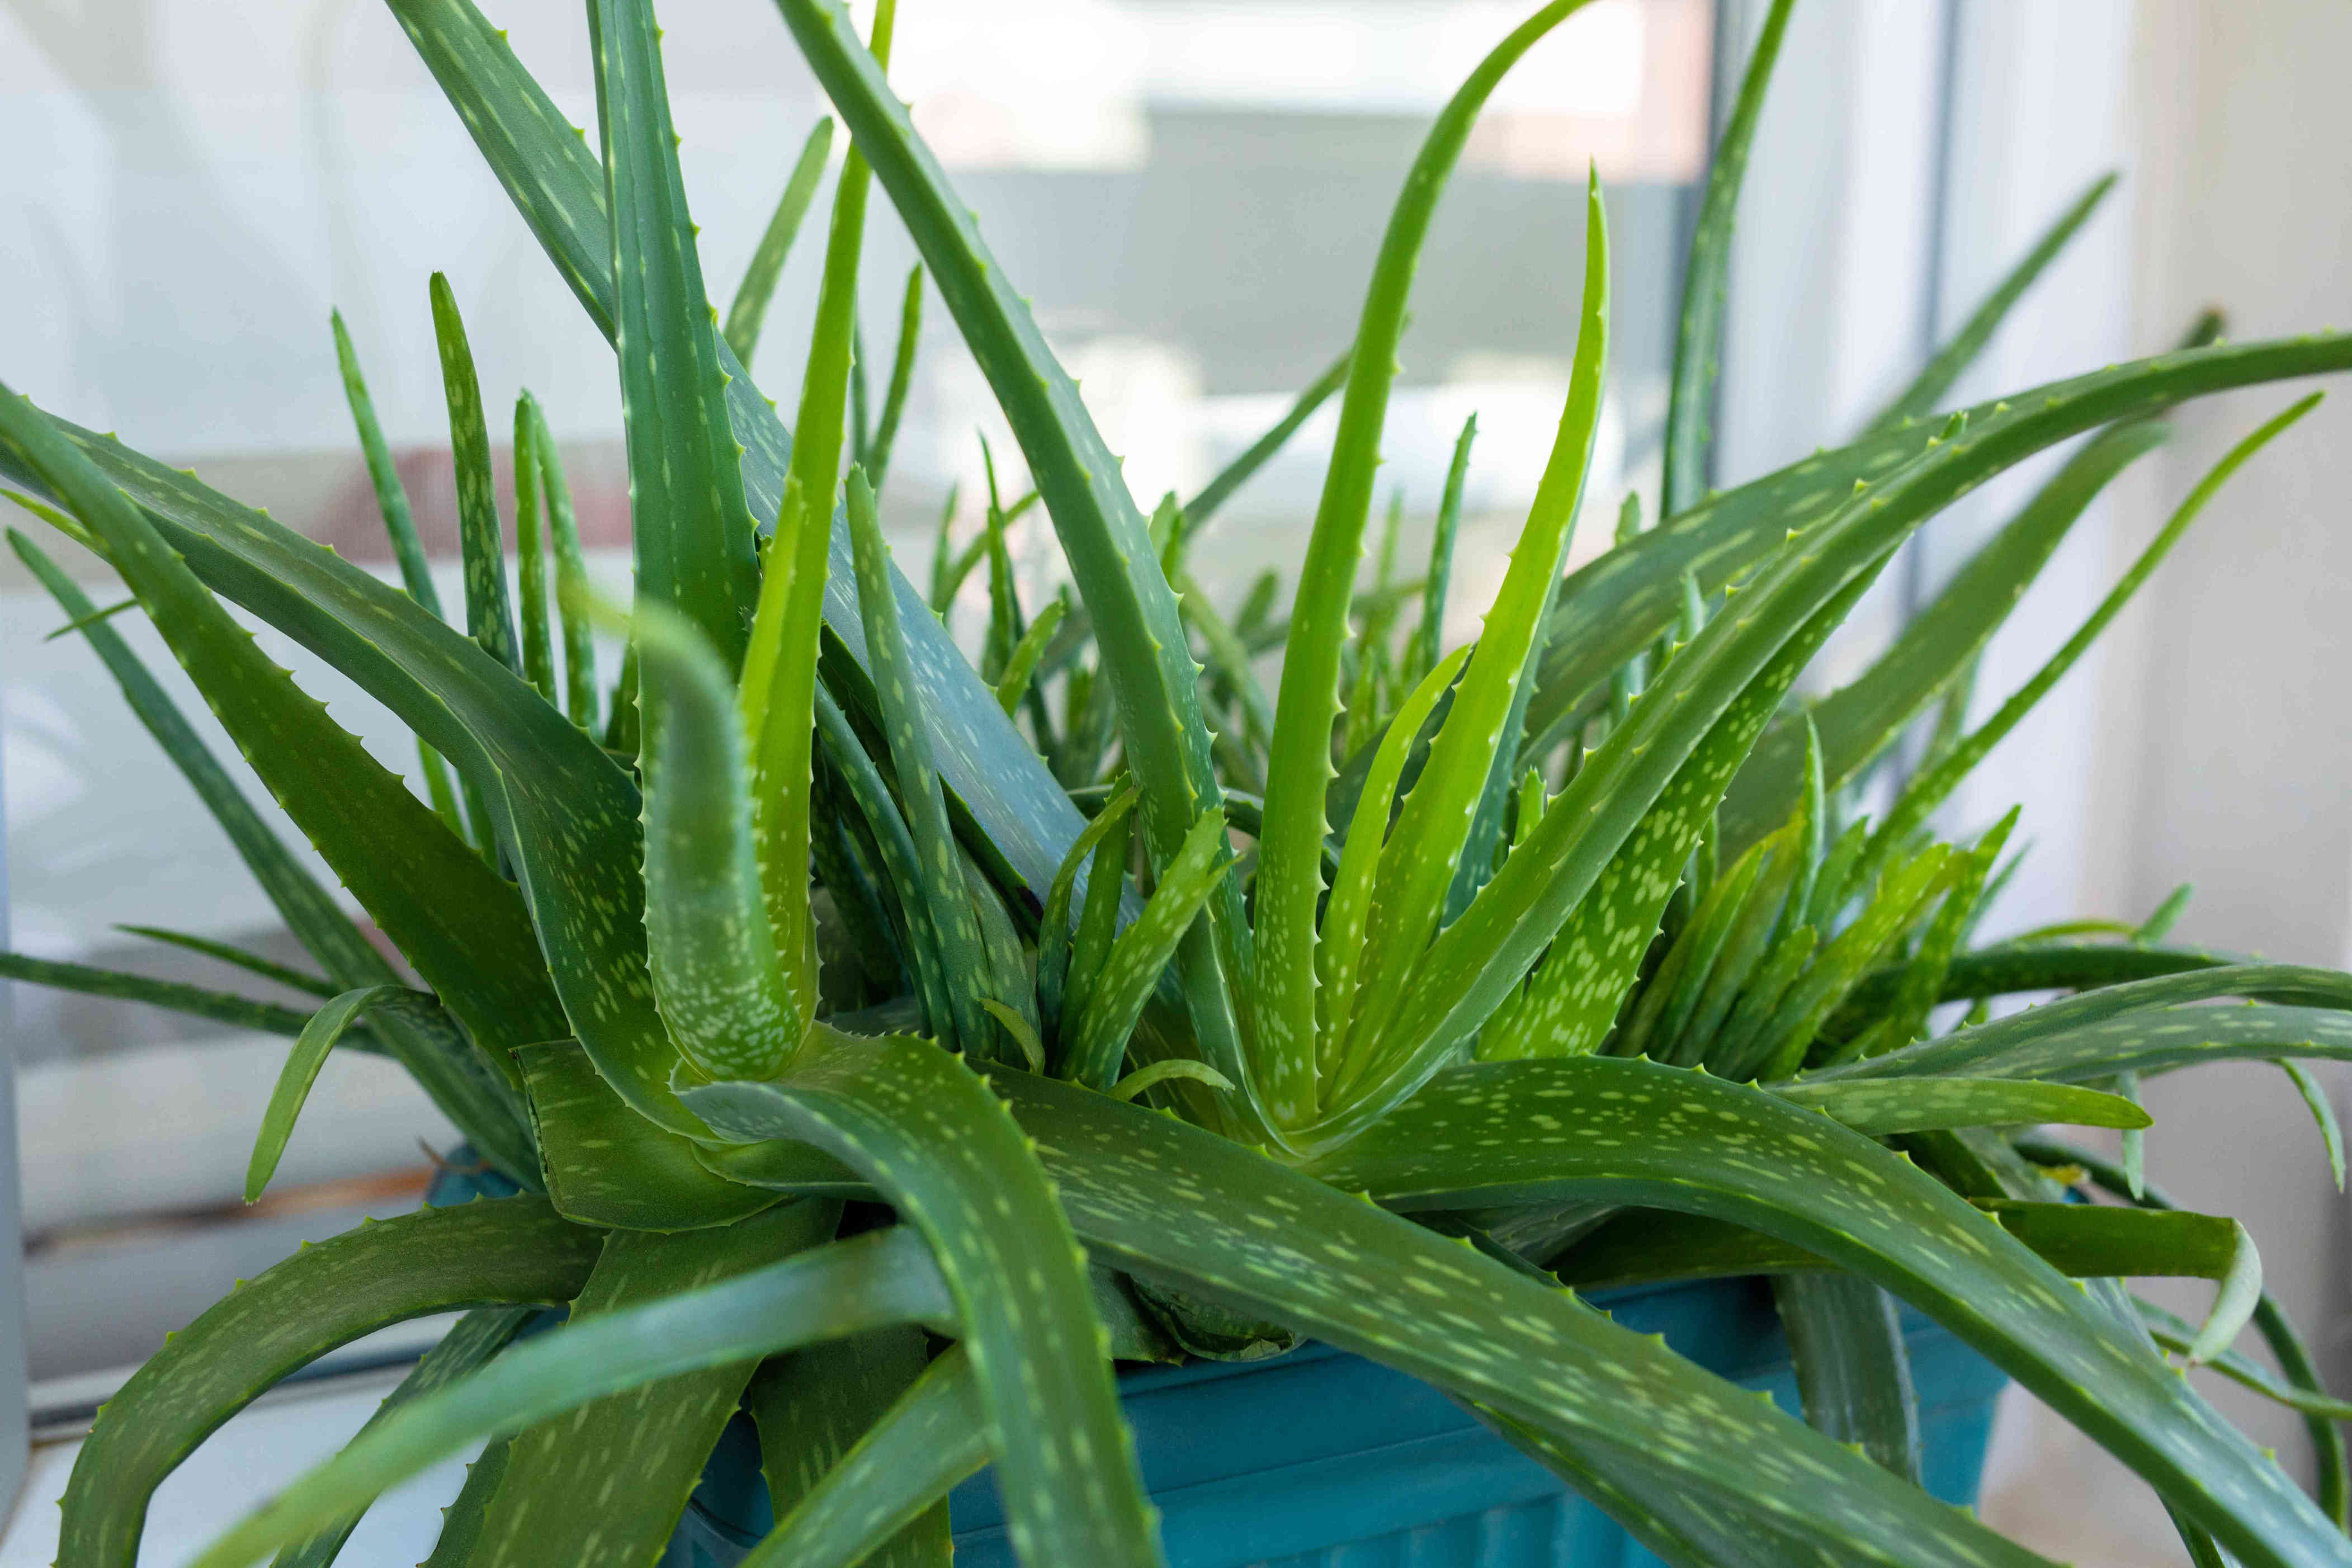 uses and benefits of aloe